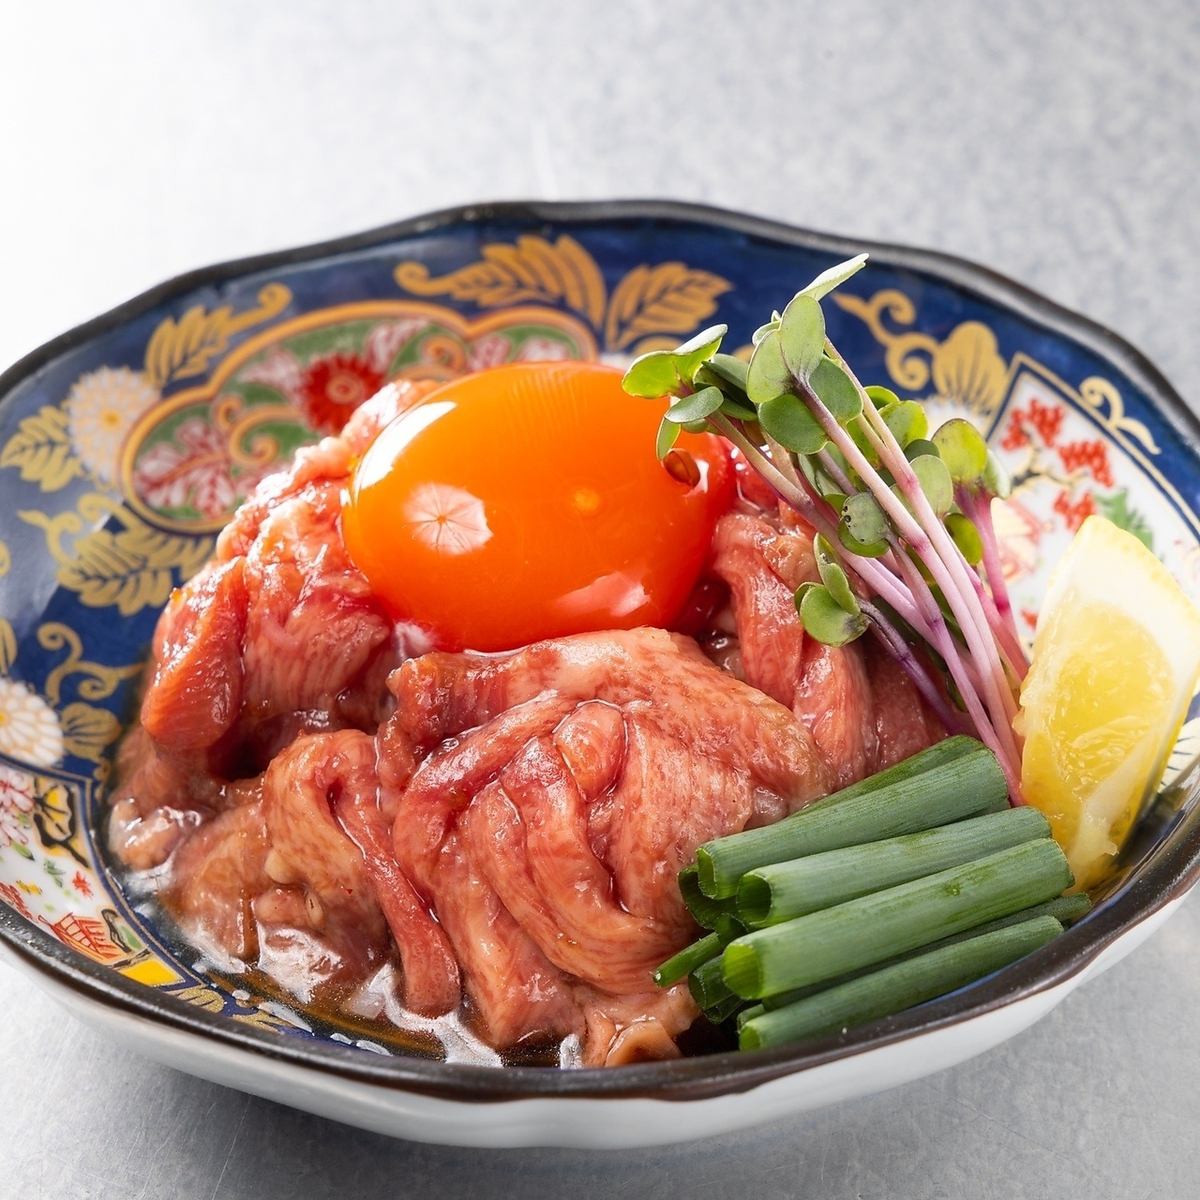 ★All-you-can-eat yakiniku★All-you-can-eat Japanese black beef♪Available from 3,800 yen!